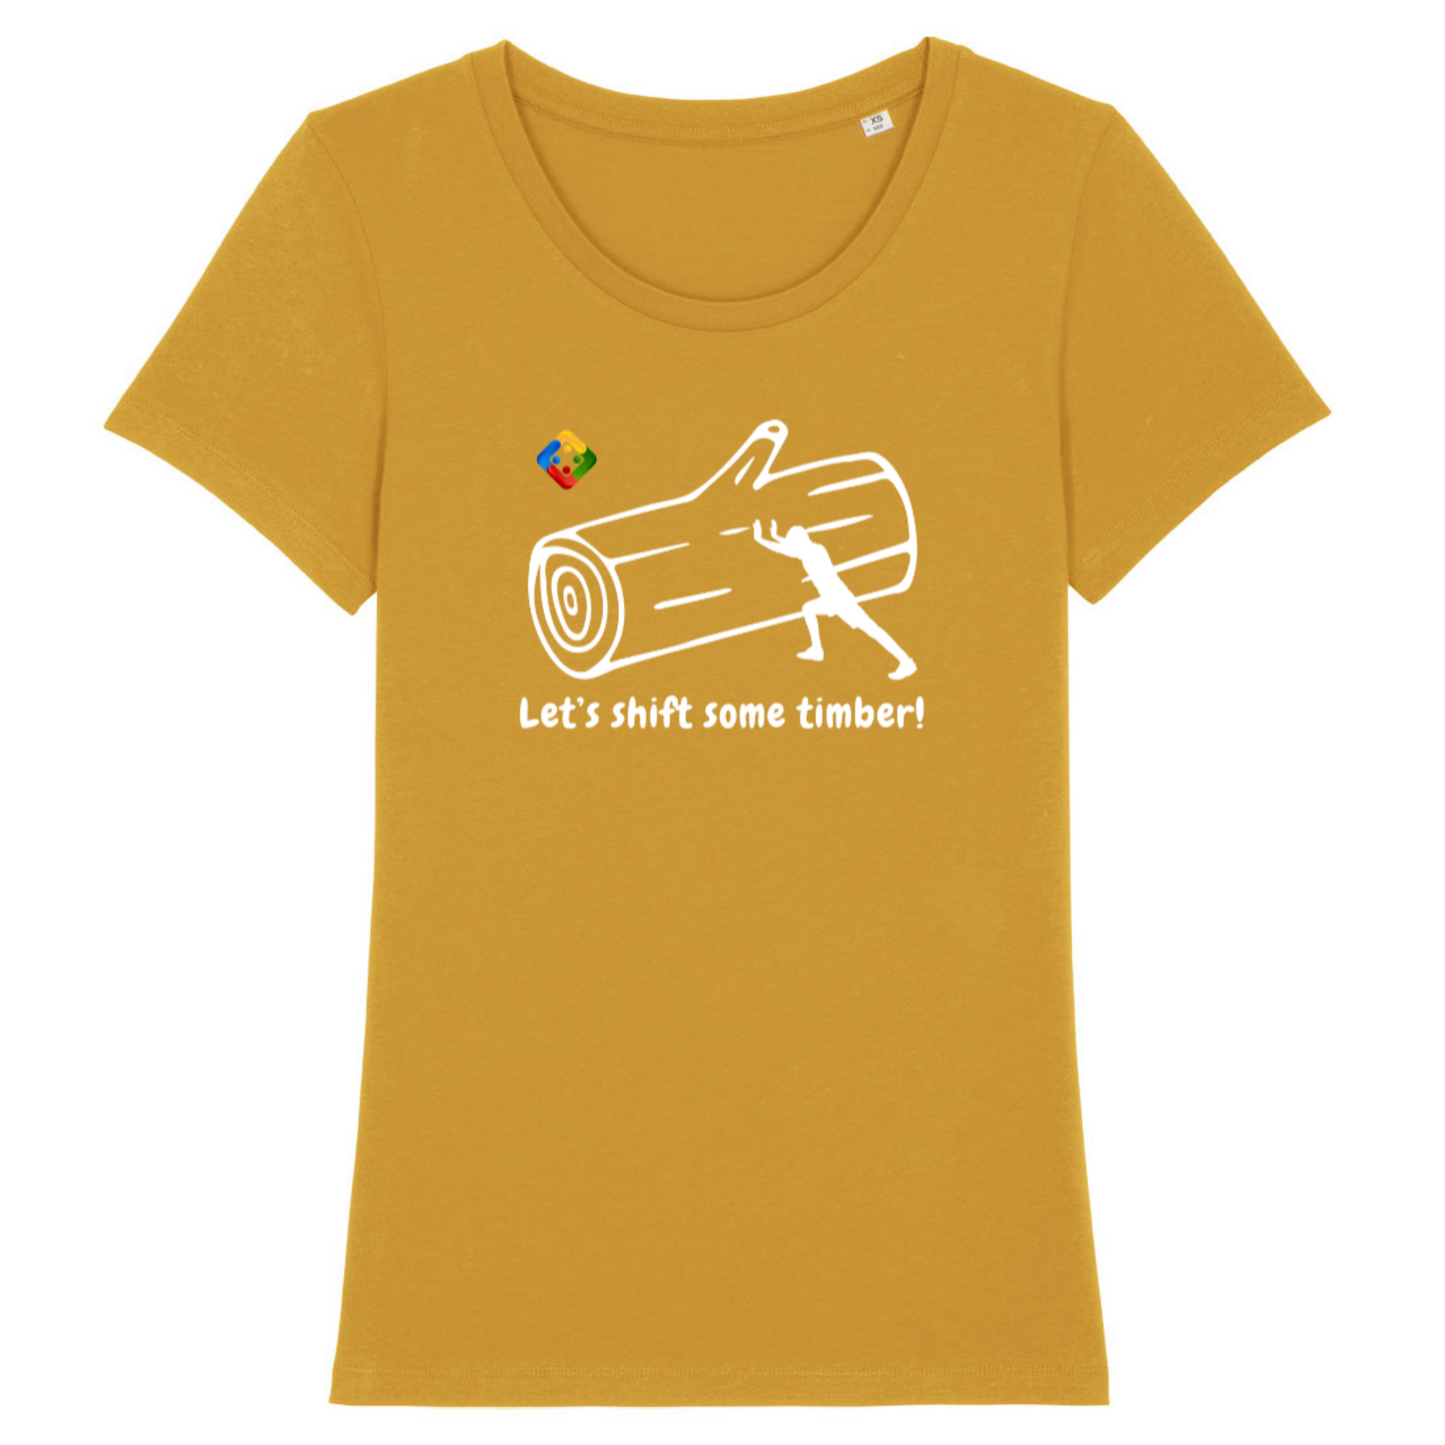 Women's organic T-shirt with printed 'Timber shifting' design. Available in 11 colours.